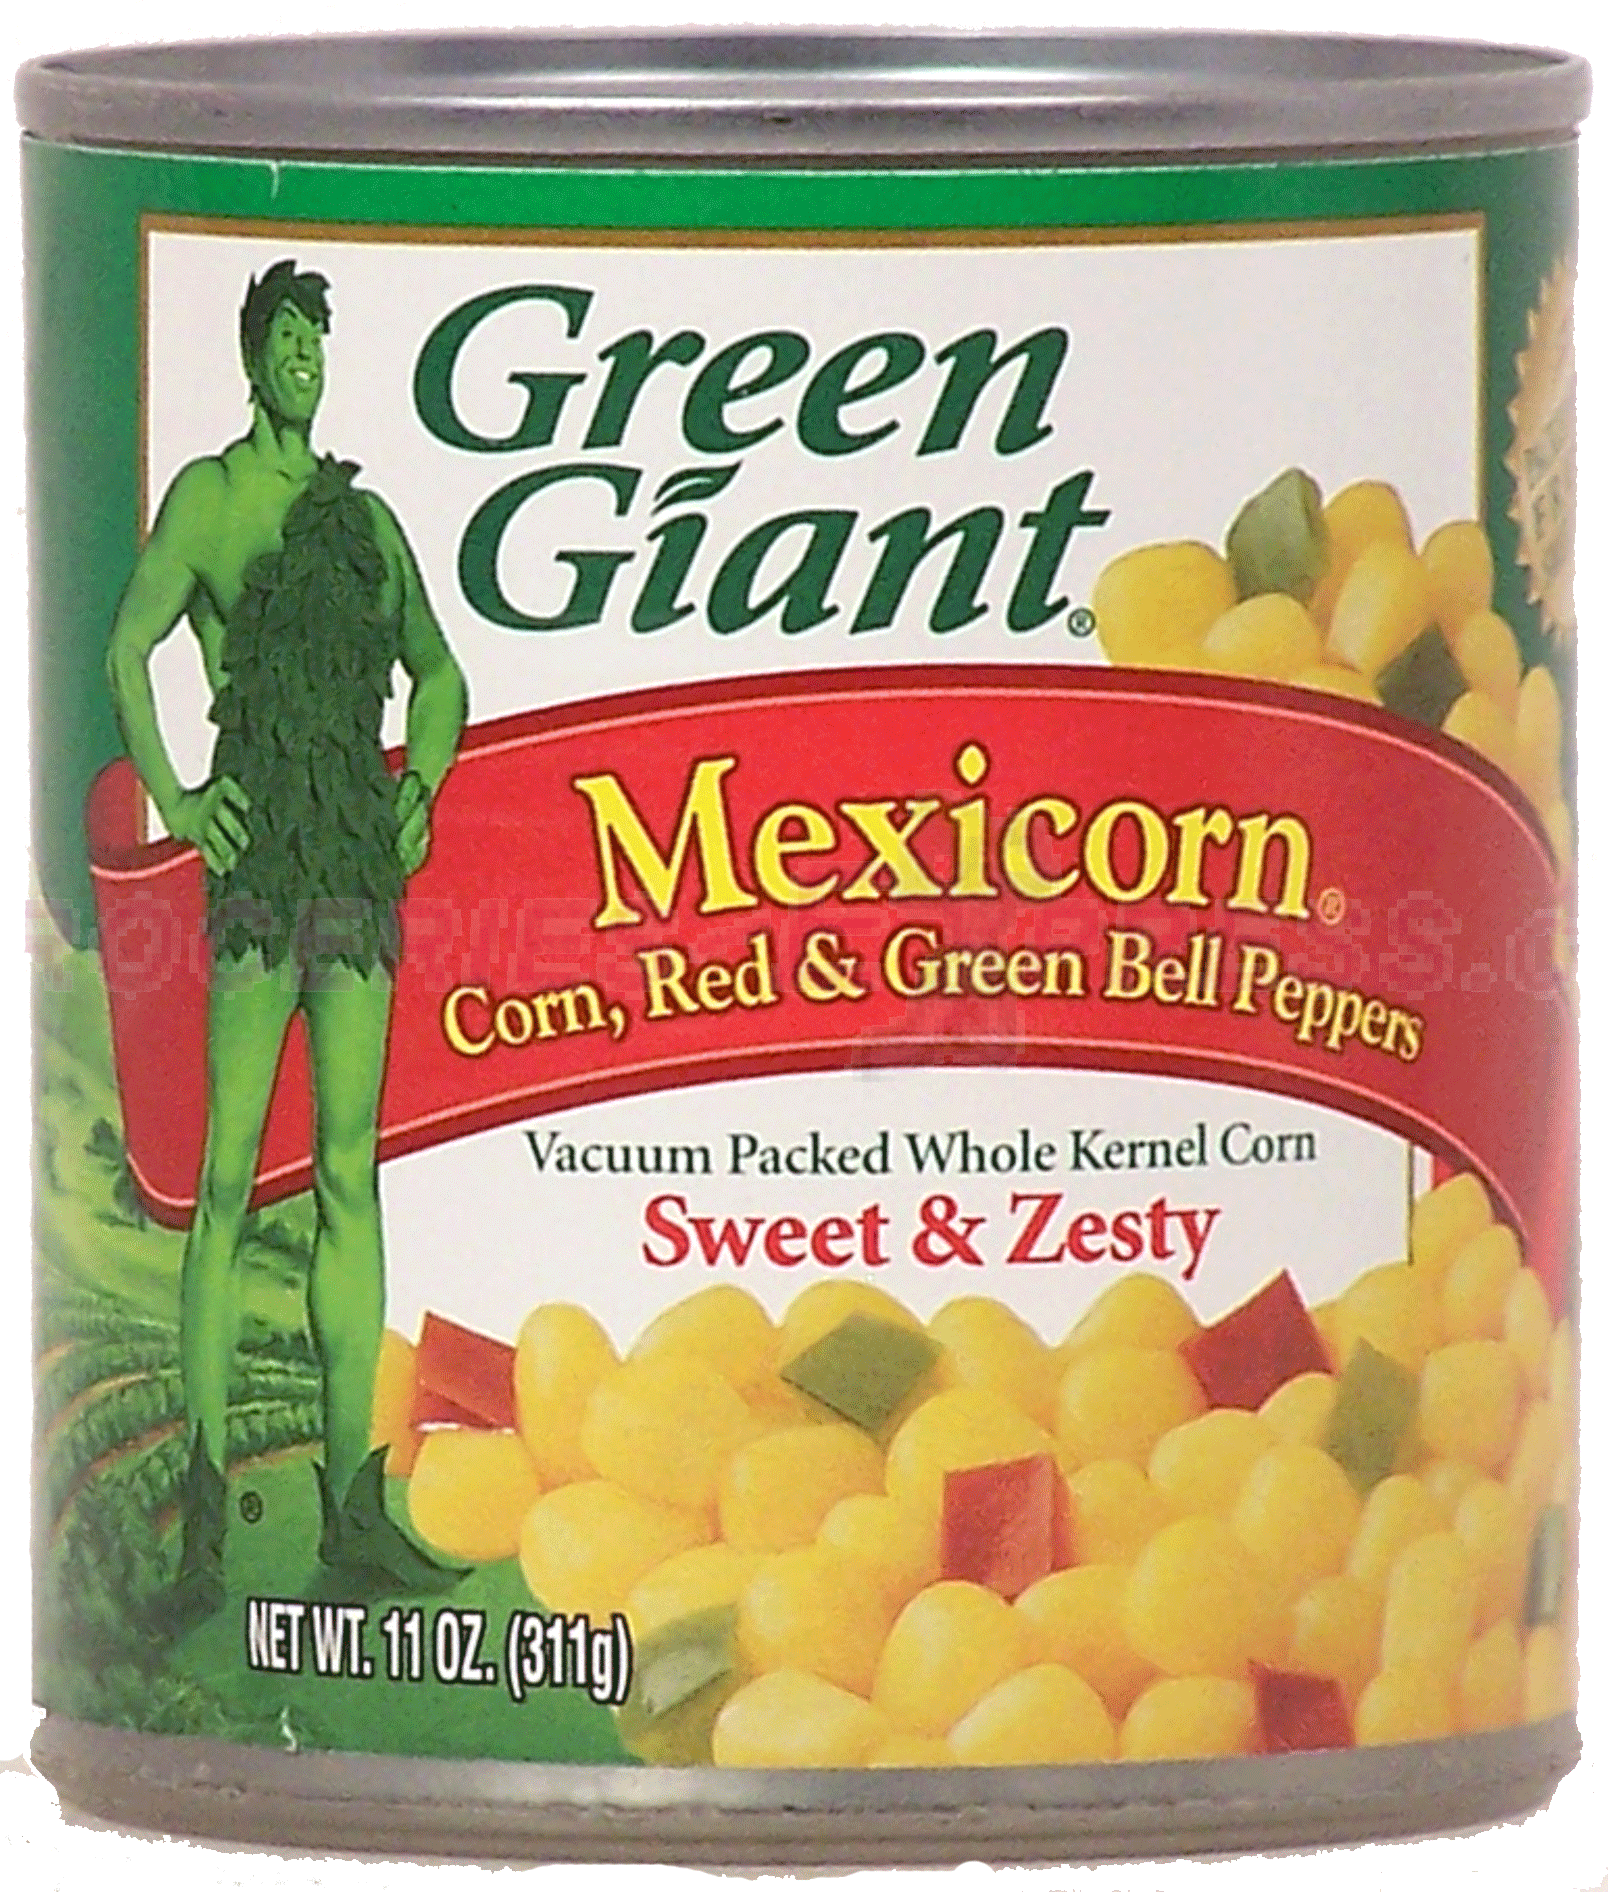 Green Giant Mexicorn whole kernel corn, red & green bell peppers Full-Size Picture